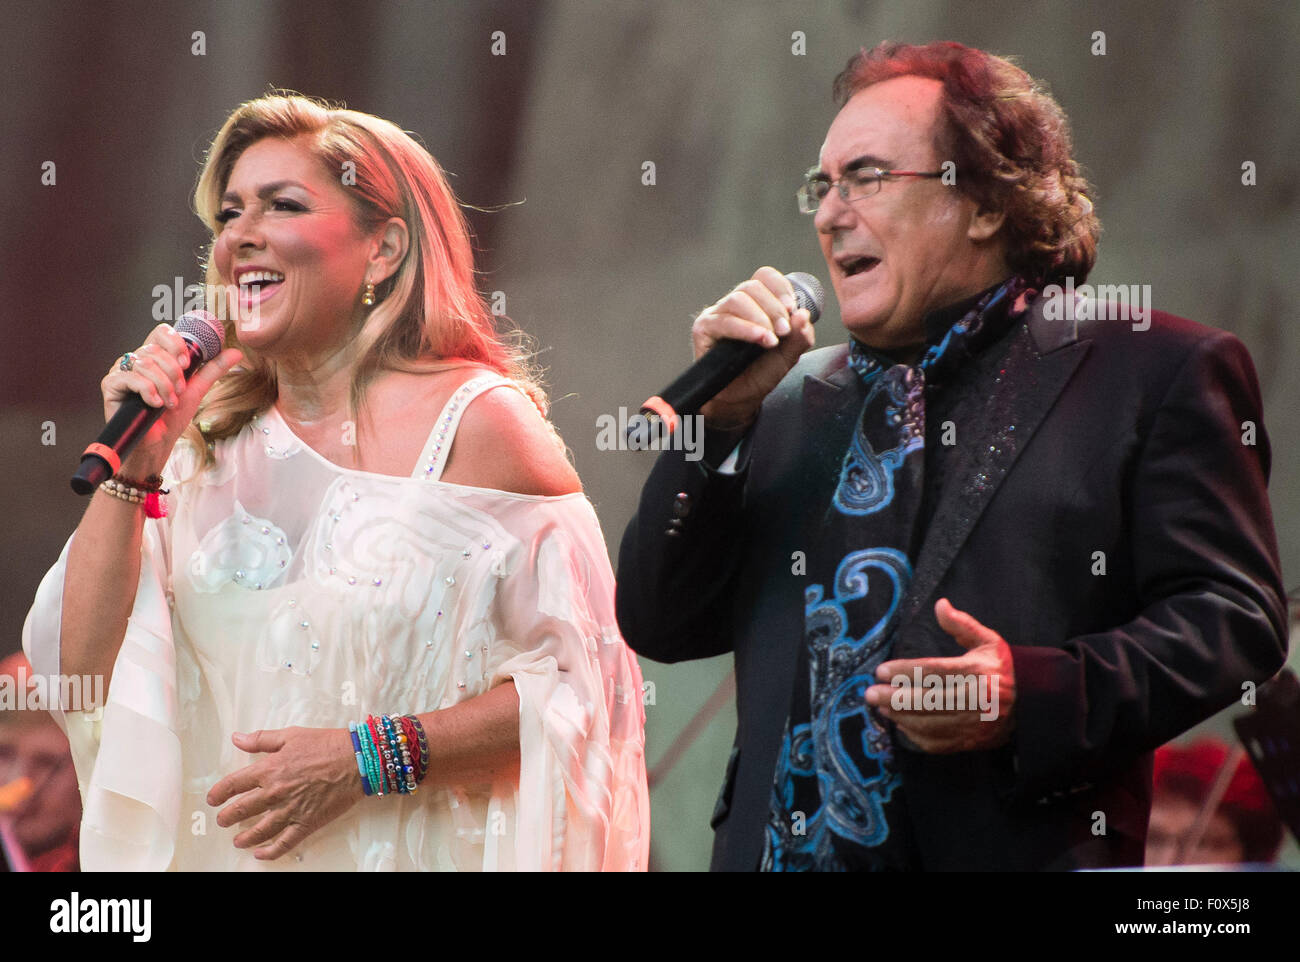 Berlin, Germany. 21st Aug, 2015. Singing duo Romina Power and Albano Carrisi (Al Bano) perform on stage during a concert in Berlin, Germany, 21 August 2015. The concert was their first in the German-speaking region in 20 years. Photo: Gregor Fischer/dpa/Alamy Live News Stock Photo